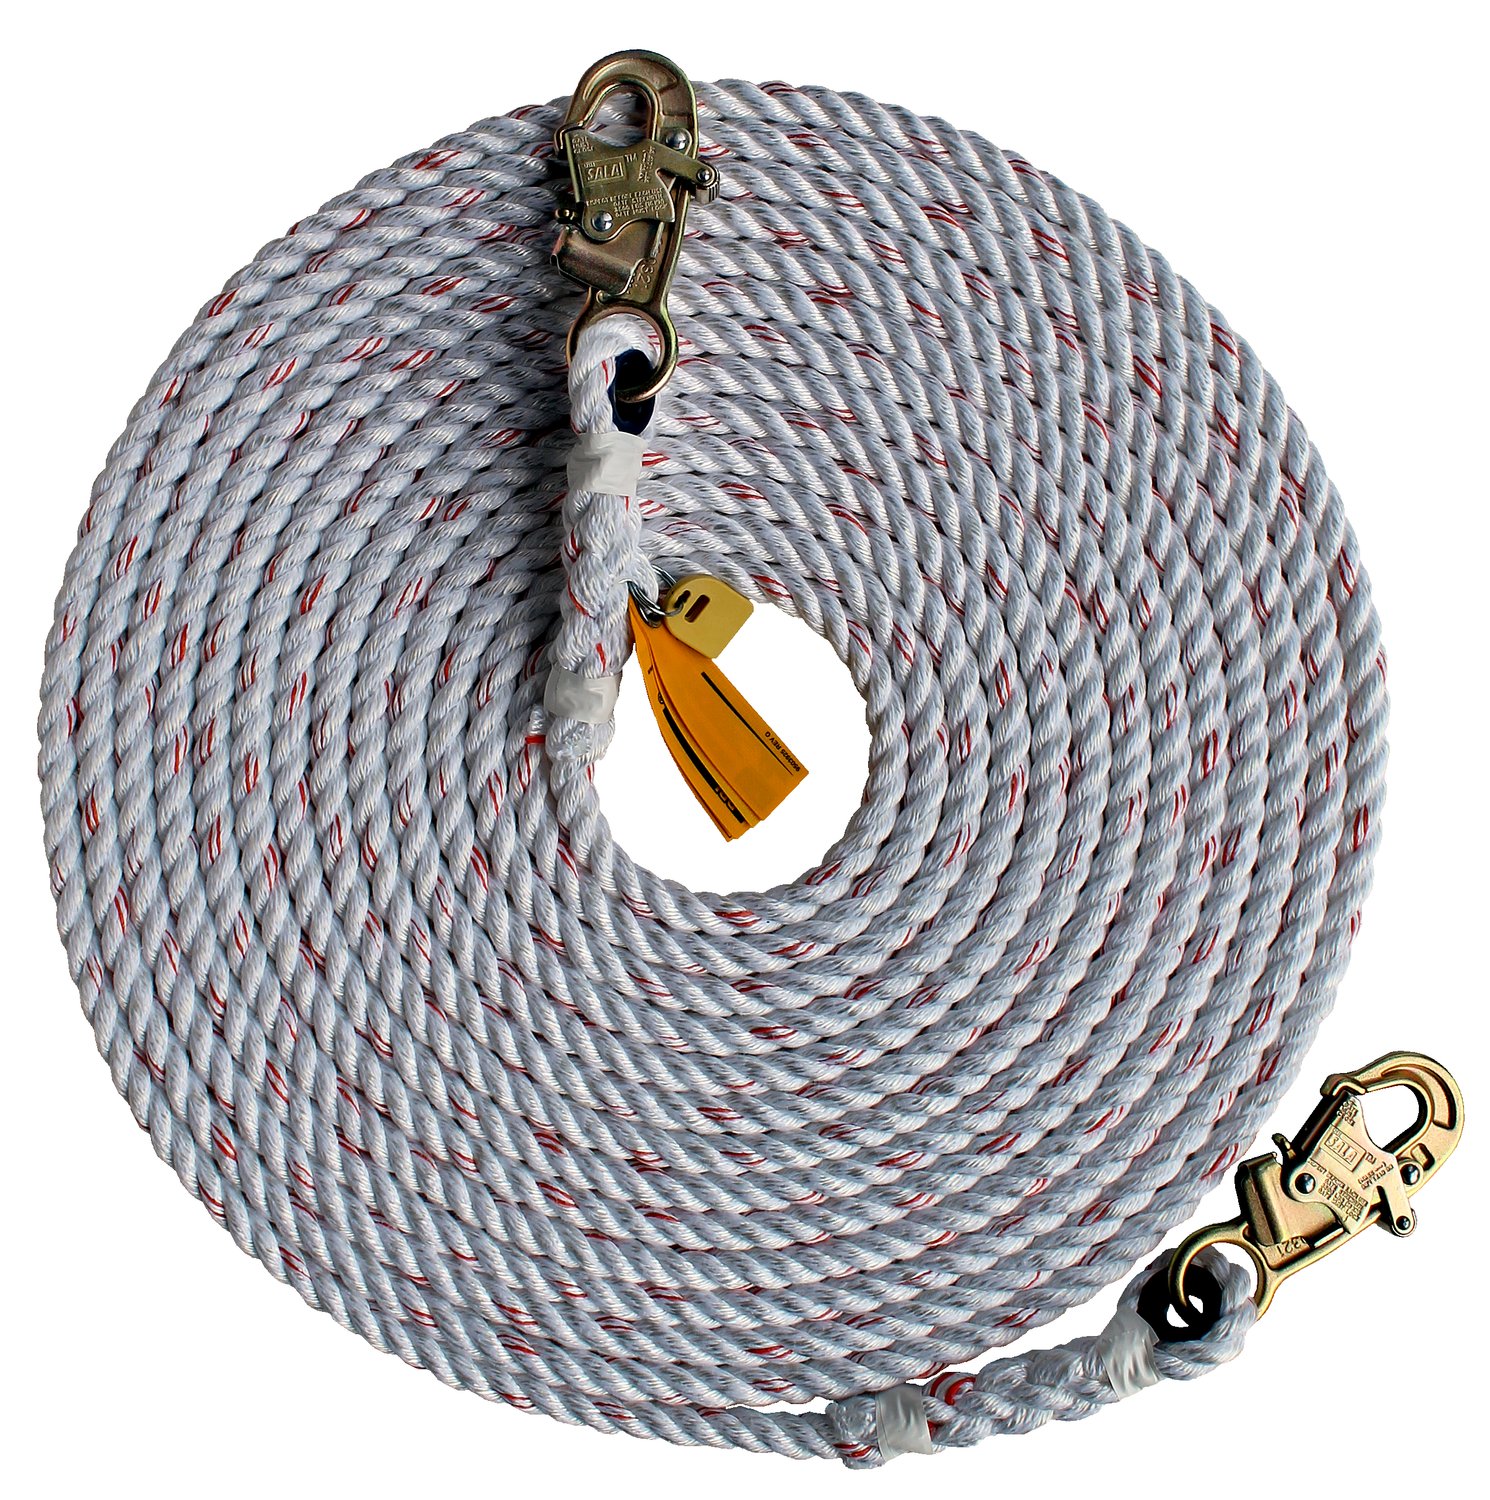 7012816983 - 3M DBI-SALA Rope Lifeline with Snap Hook Both Ends 1202962, 5/8 in Polyester and Polypropylene Blend, White, 350 ft